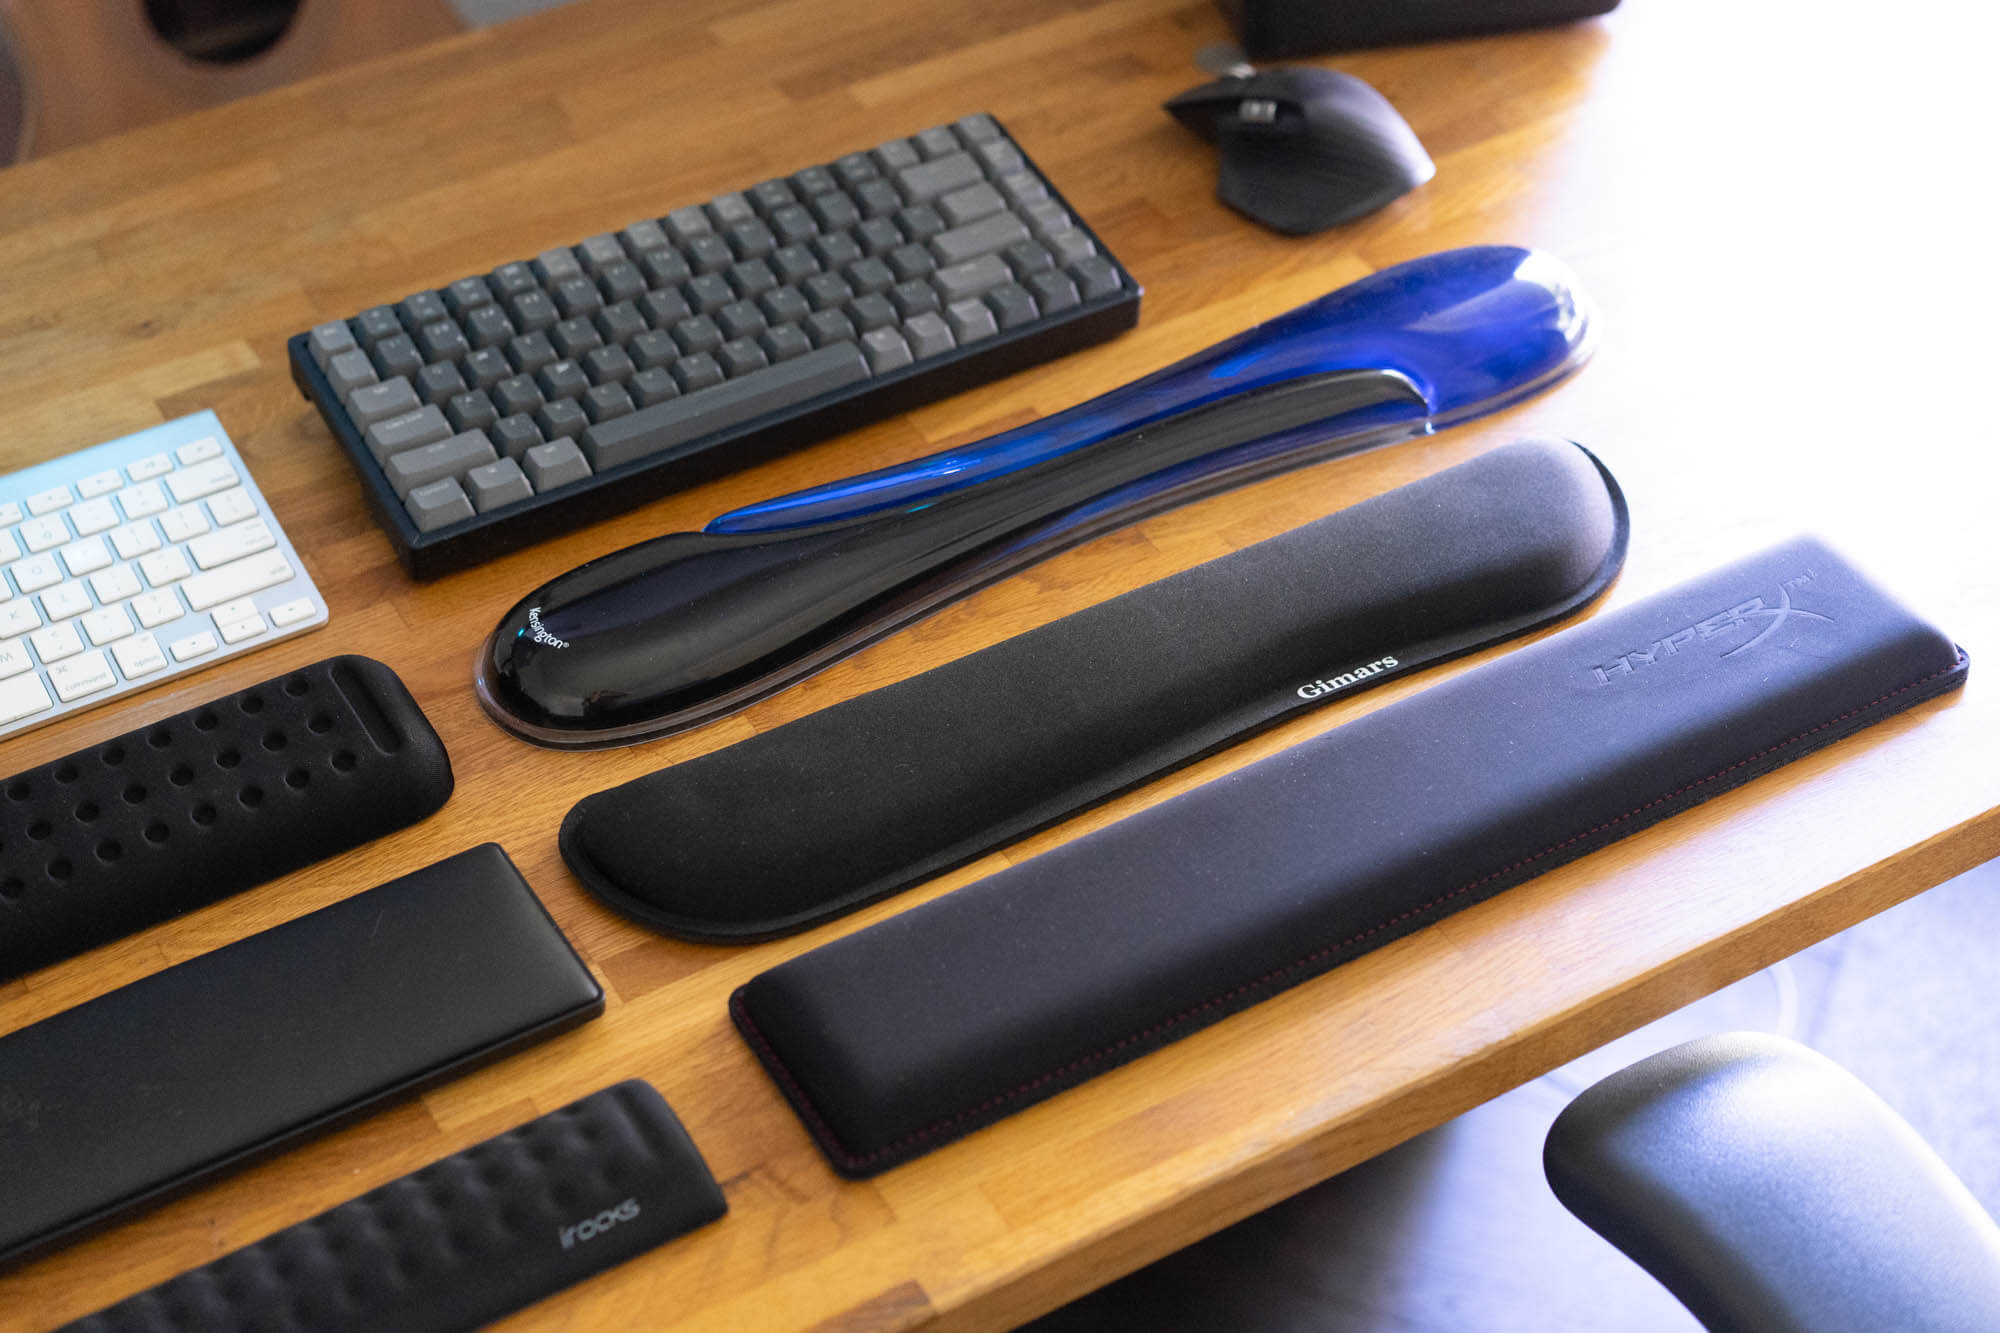 Premium Wrist Rests for Keyboard and Mouse Pad Set – CushionCare